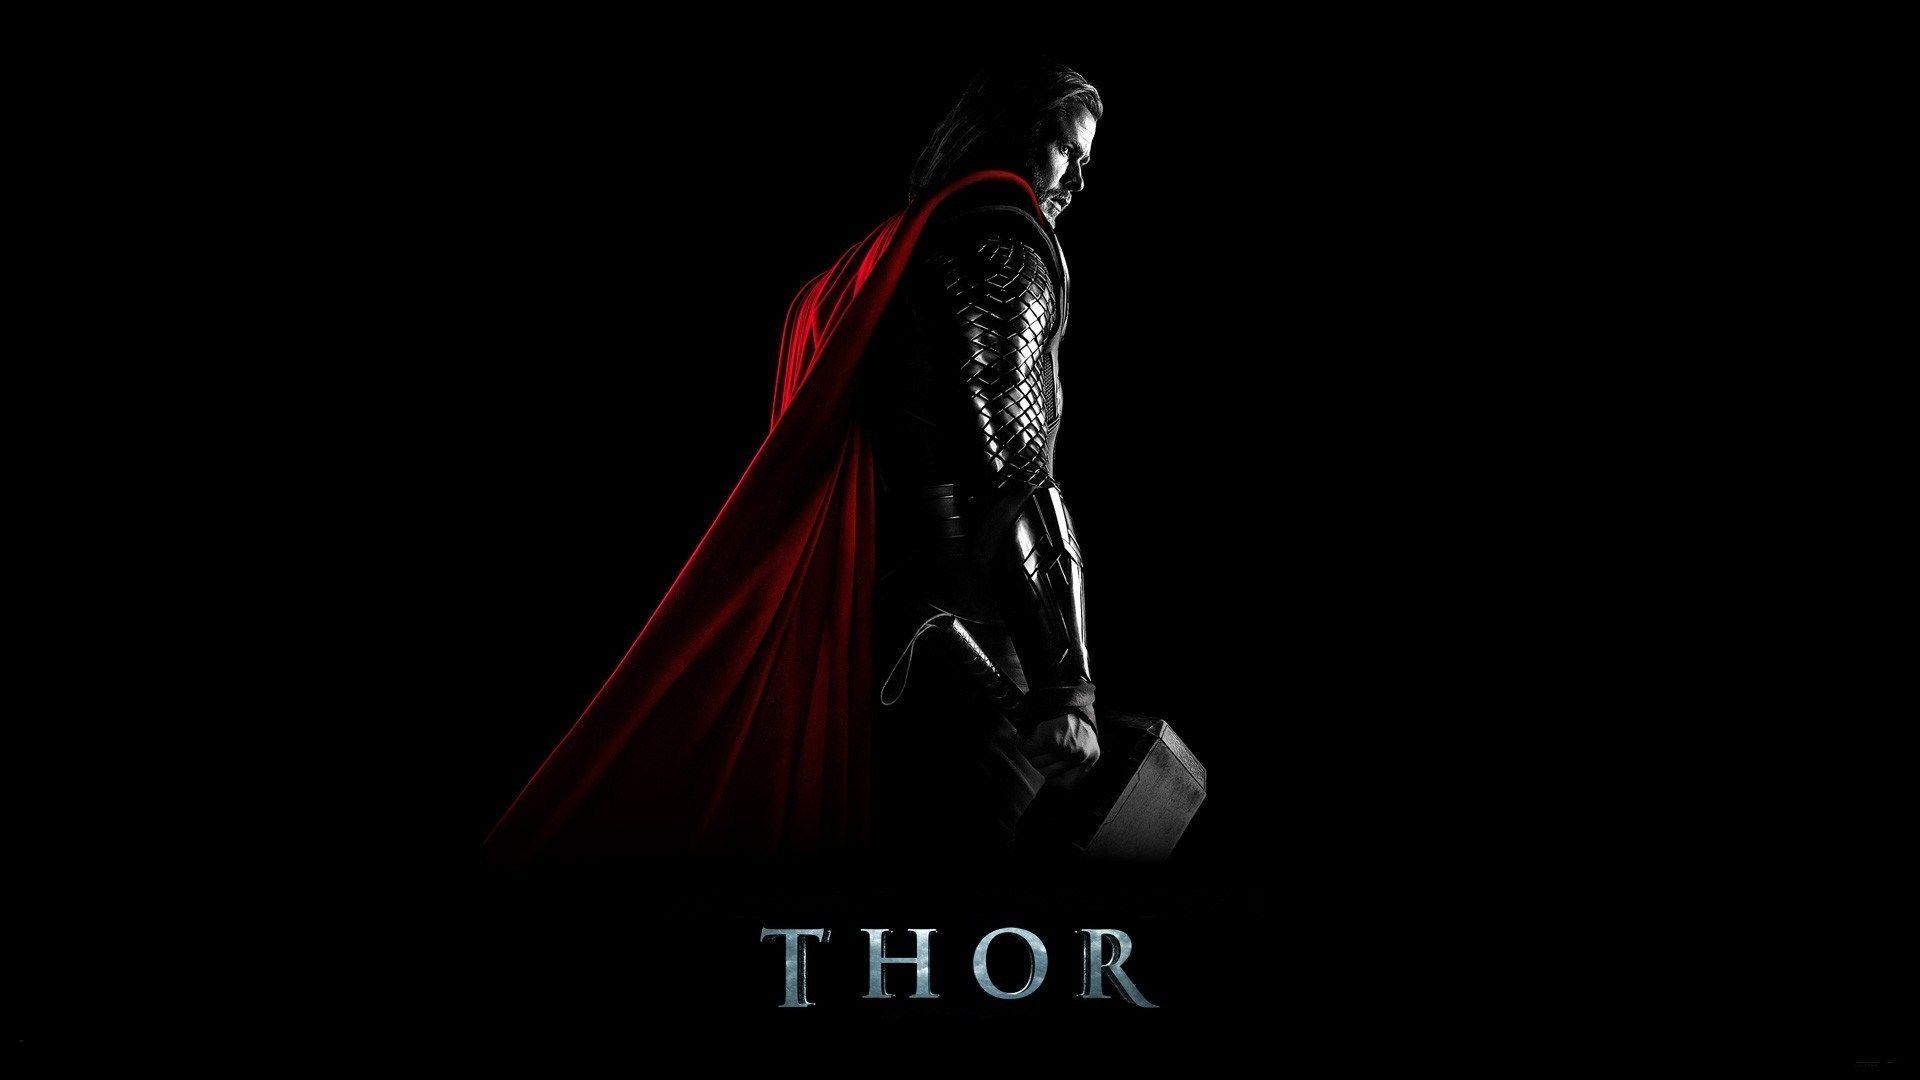 High Quality thor wallpaper (Jaylee Leapman 1920x1080). Thor wallpaper, Thor posters, Marvel wallpaper